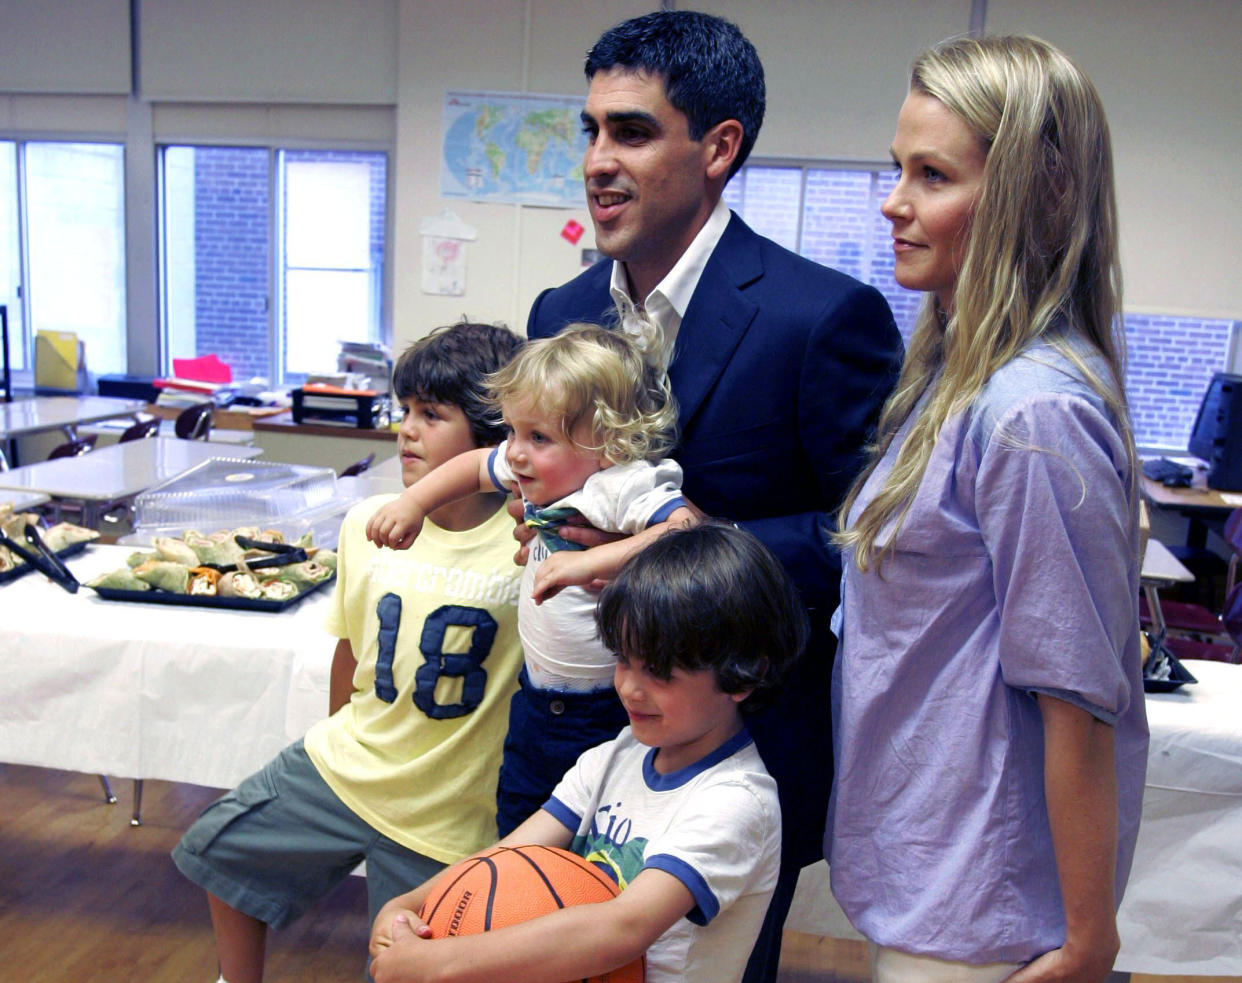 Claudio Reyna (top left) and his wife, Danielle, pose with their sons, from bottom left to right, Jack, 9, Joah, 17 months, and Giovanni, 5, before a news conference in Newark, N.J., July 16, 2008, to announce Reyna's retirement from soccer. (AP Photo/Mike Derer, File)